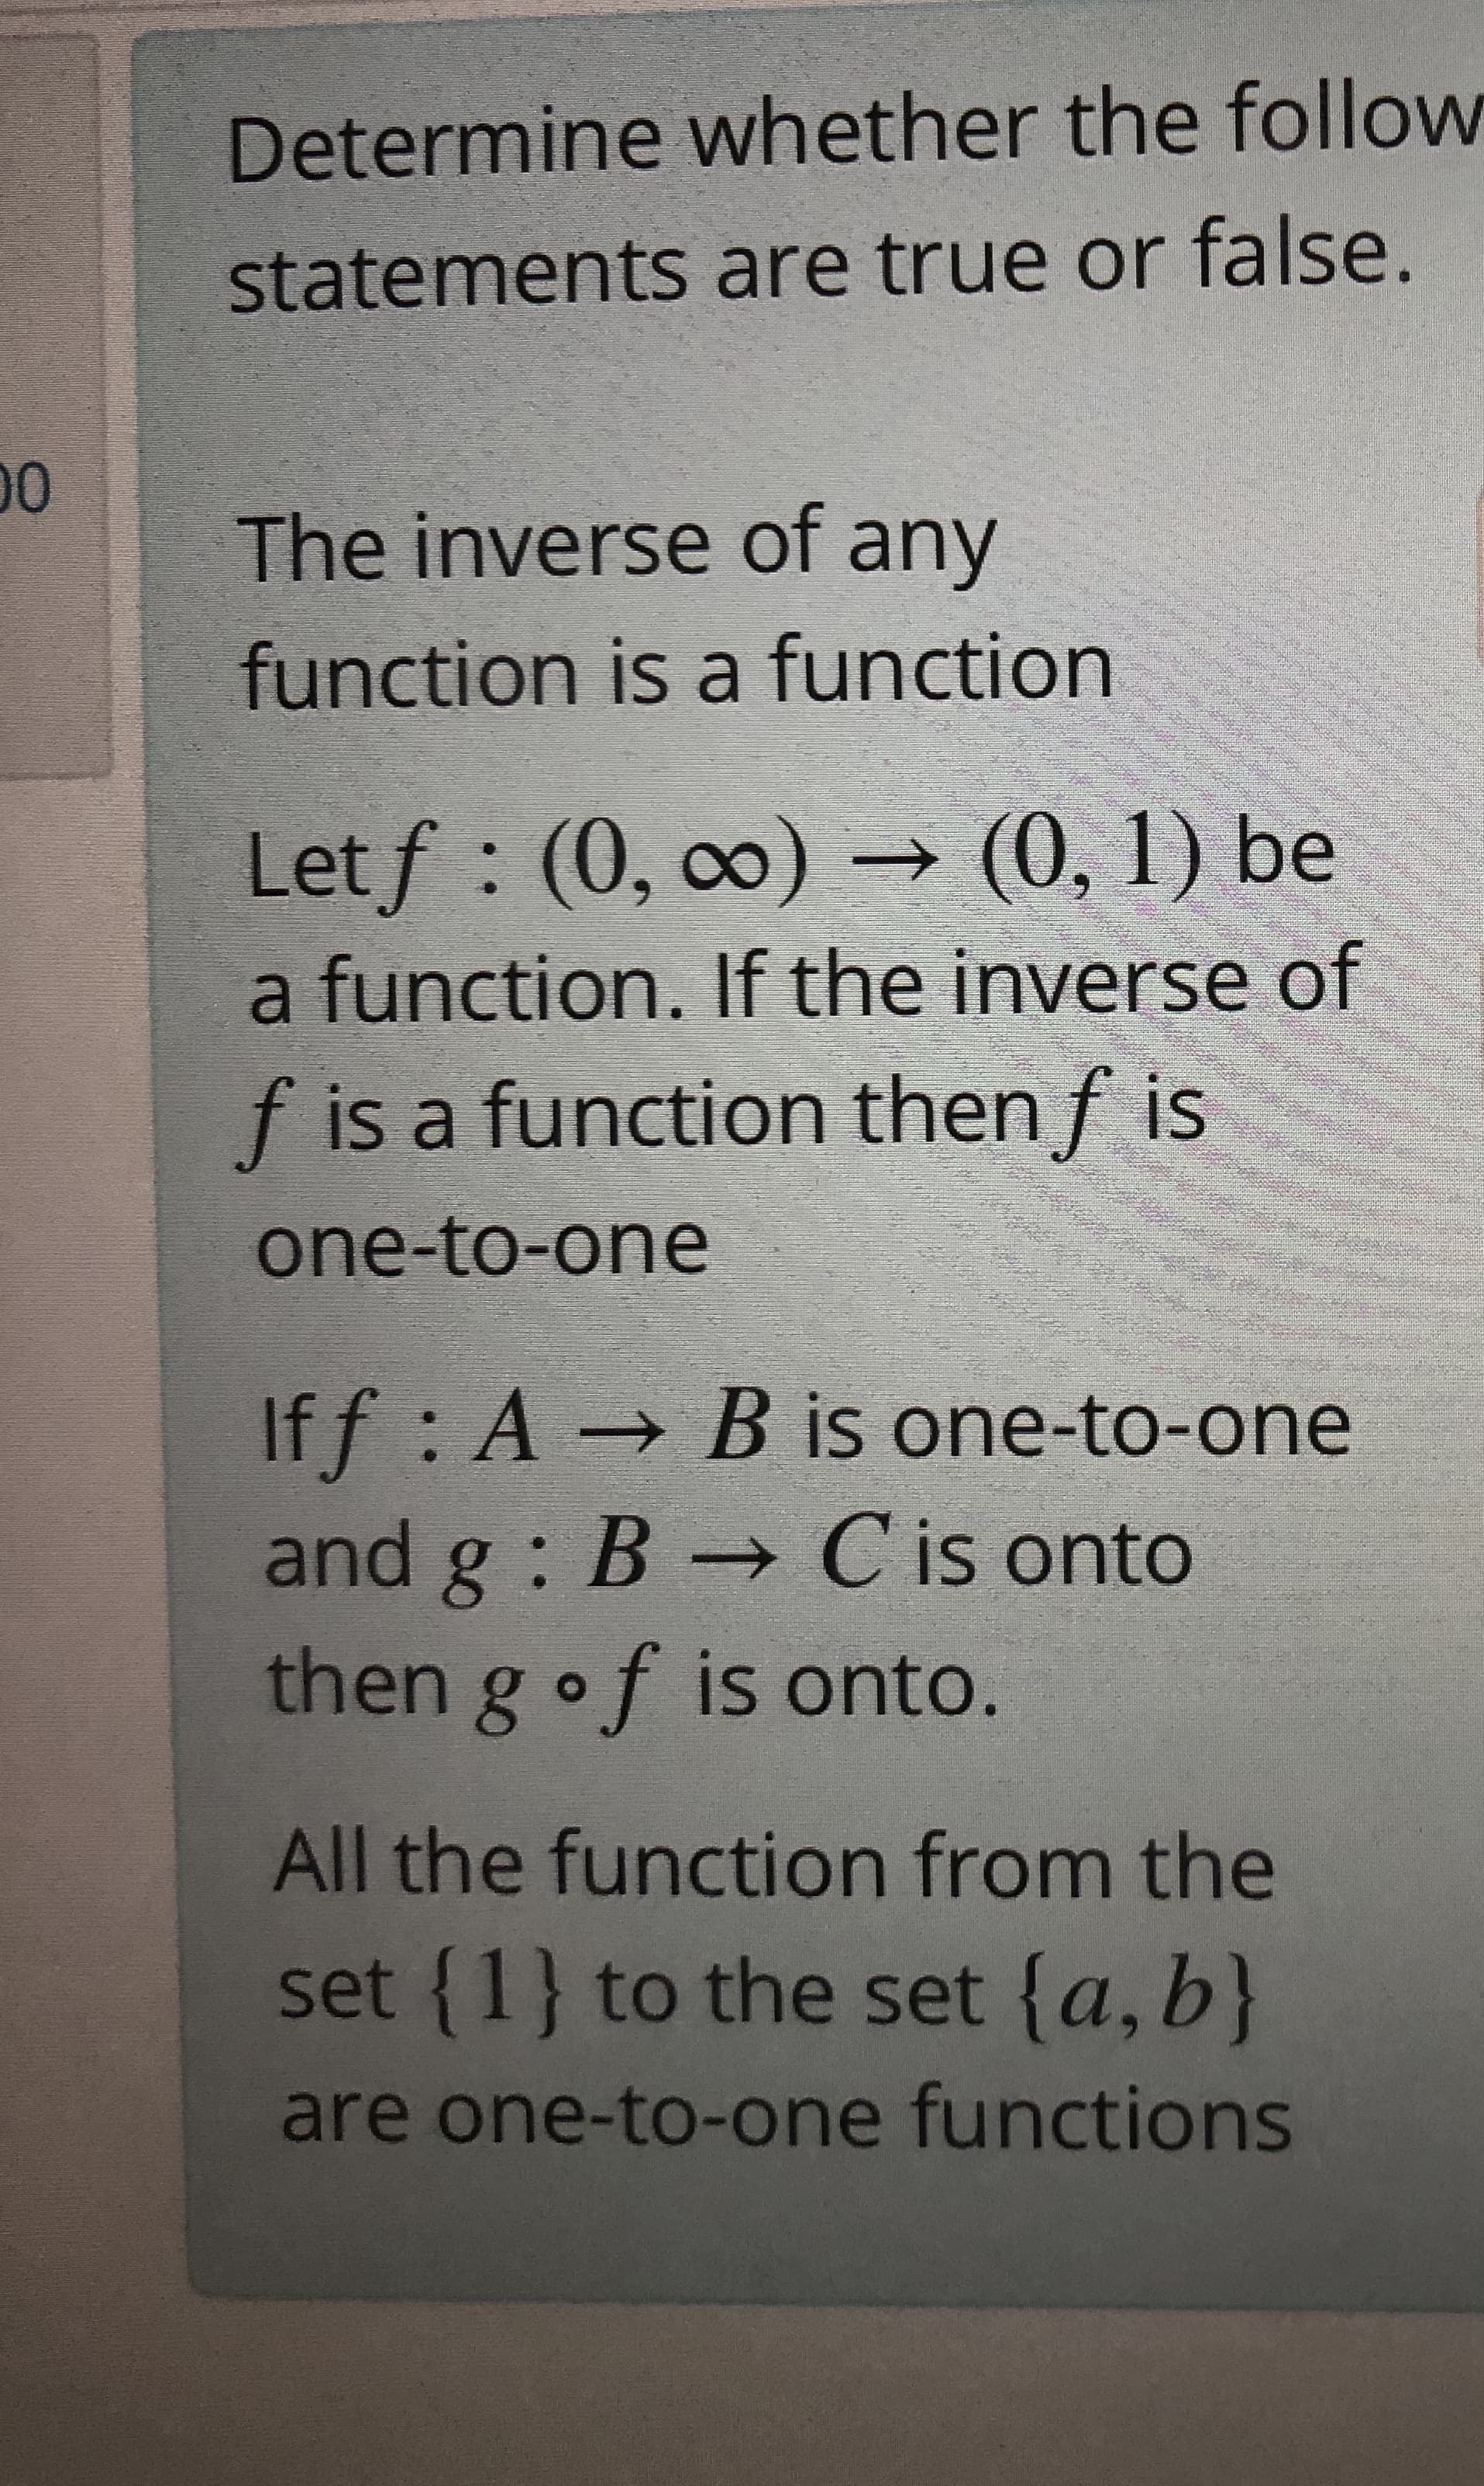 The inverse of any
function is a function
